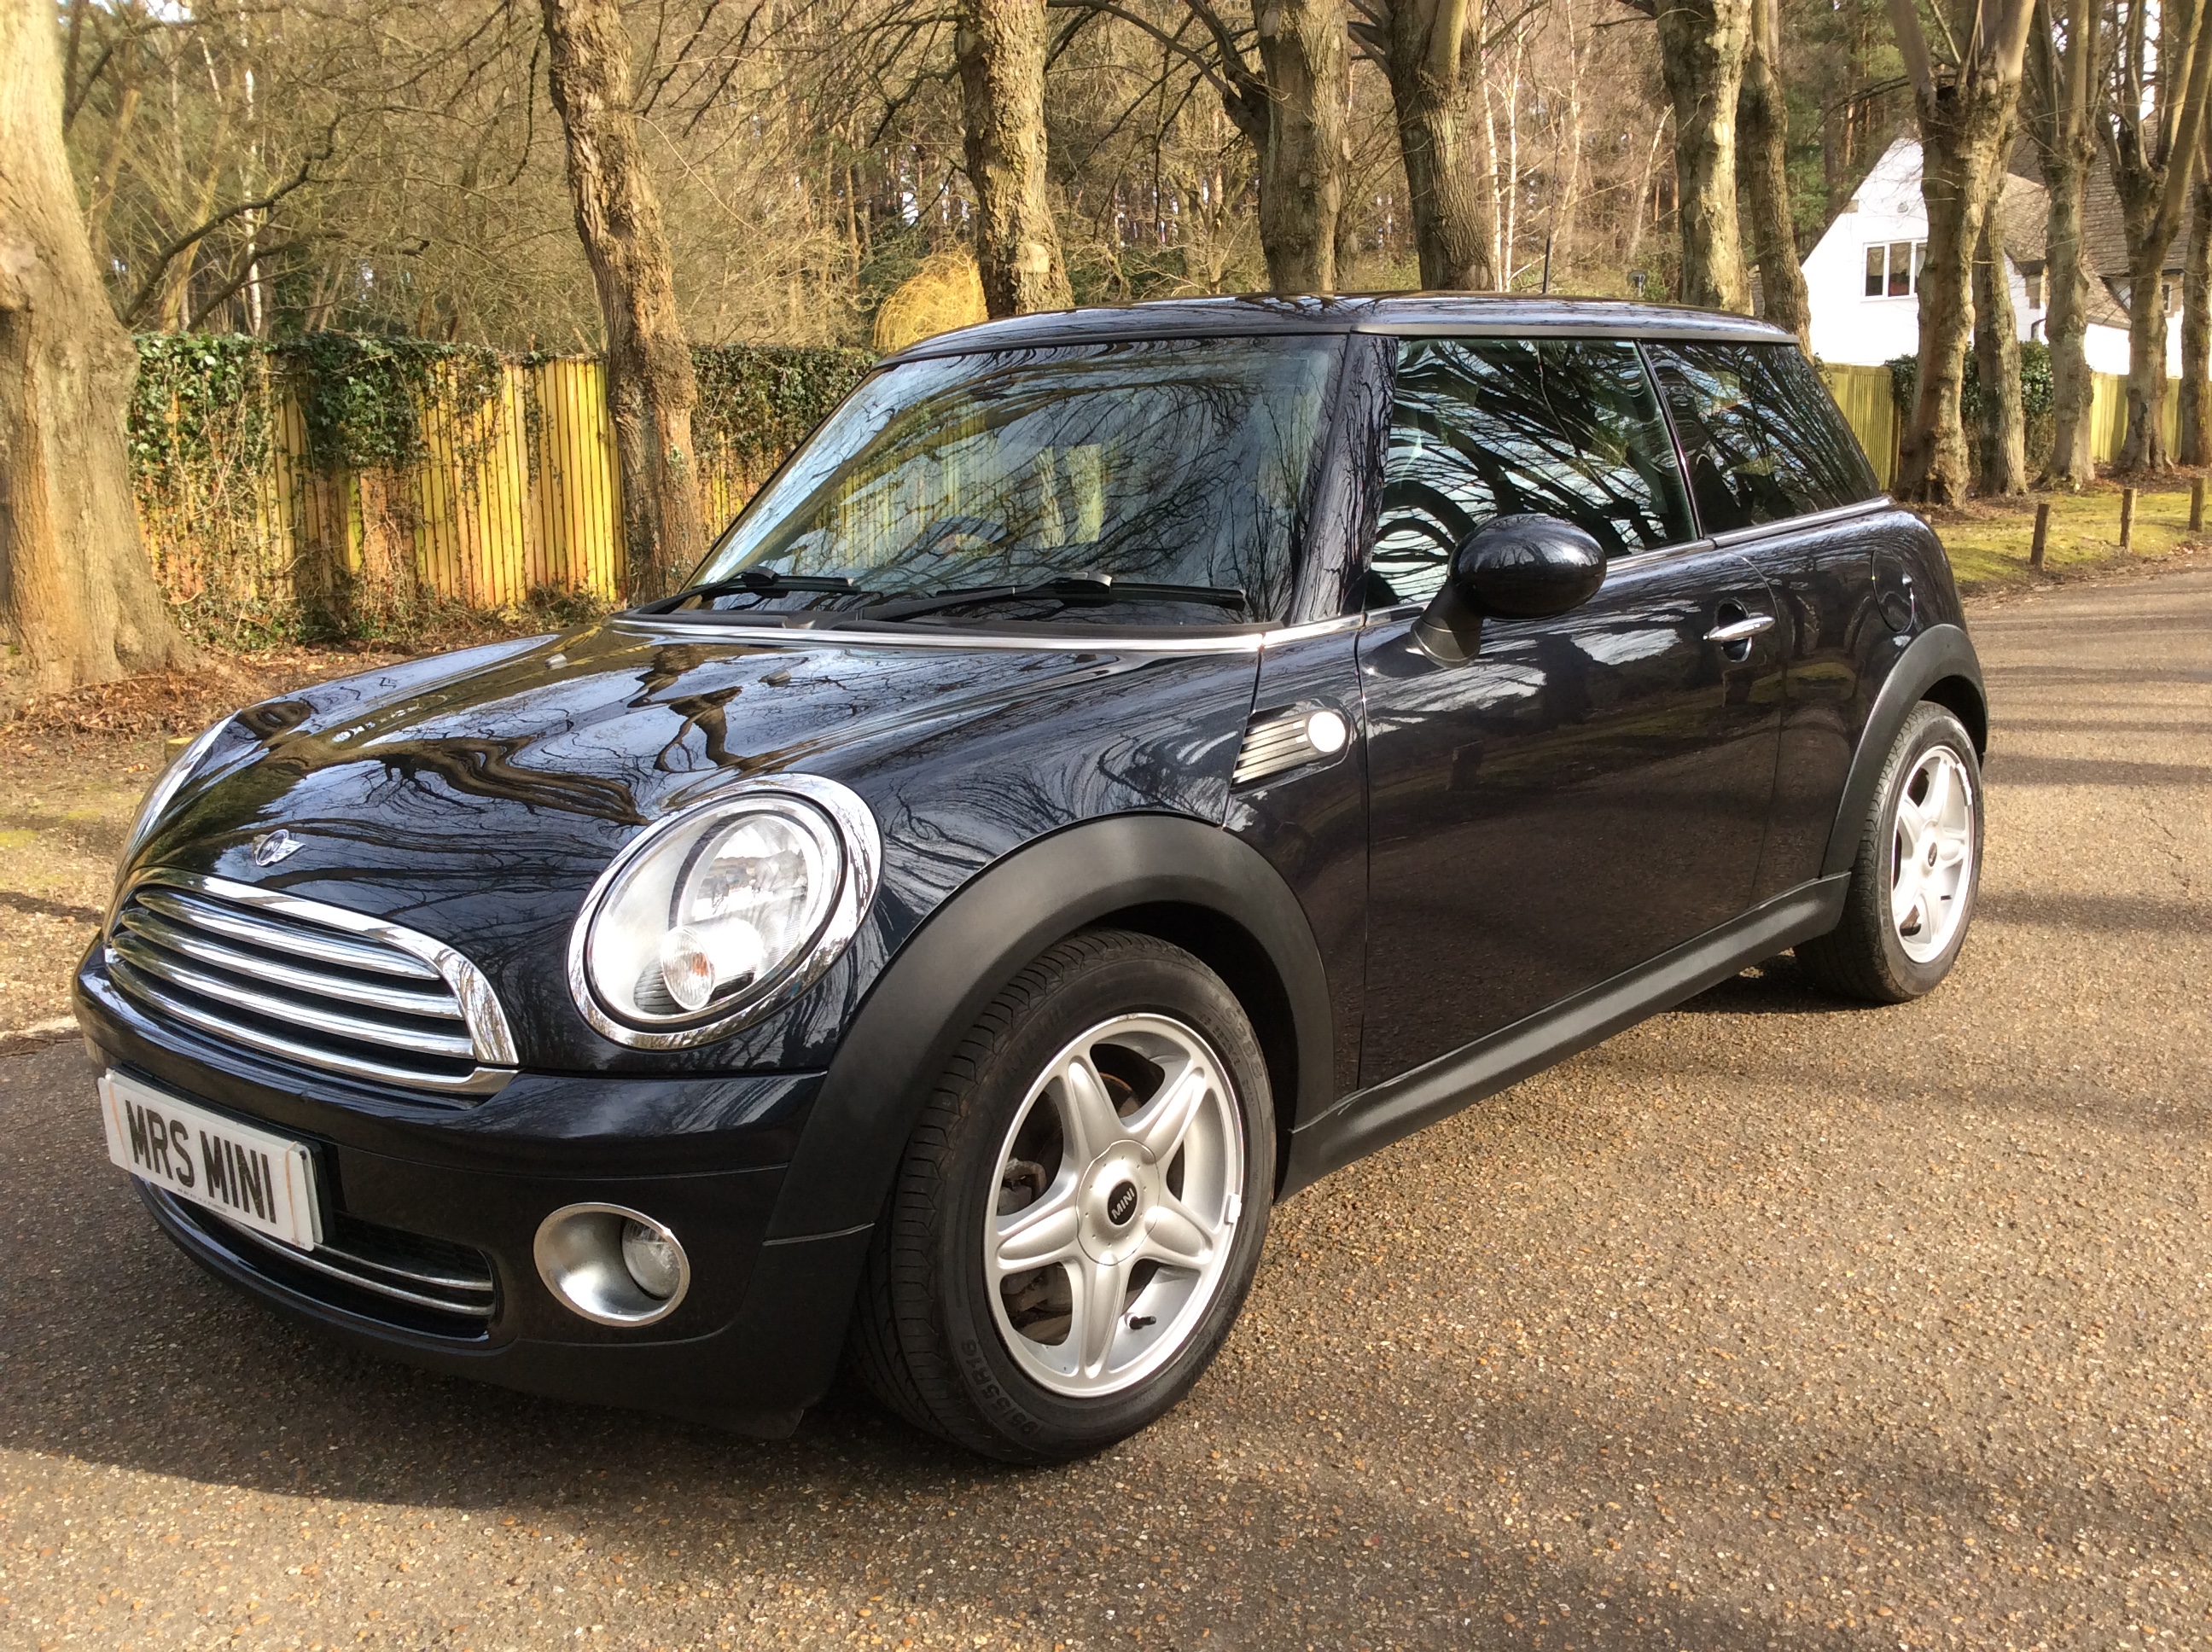 Too Late Vera has chosen this 2007 57 MINI ONE 1.4 in Black with Visibility  Pack including Heated Front Windscreen & Cruise & Multifunction Steering  Wheel - Mrs MINI - Used MINI Cars for Sale